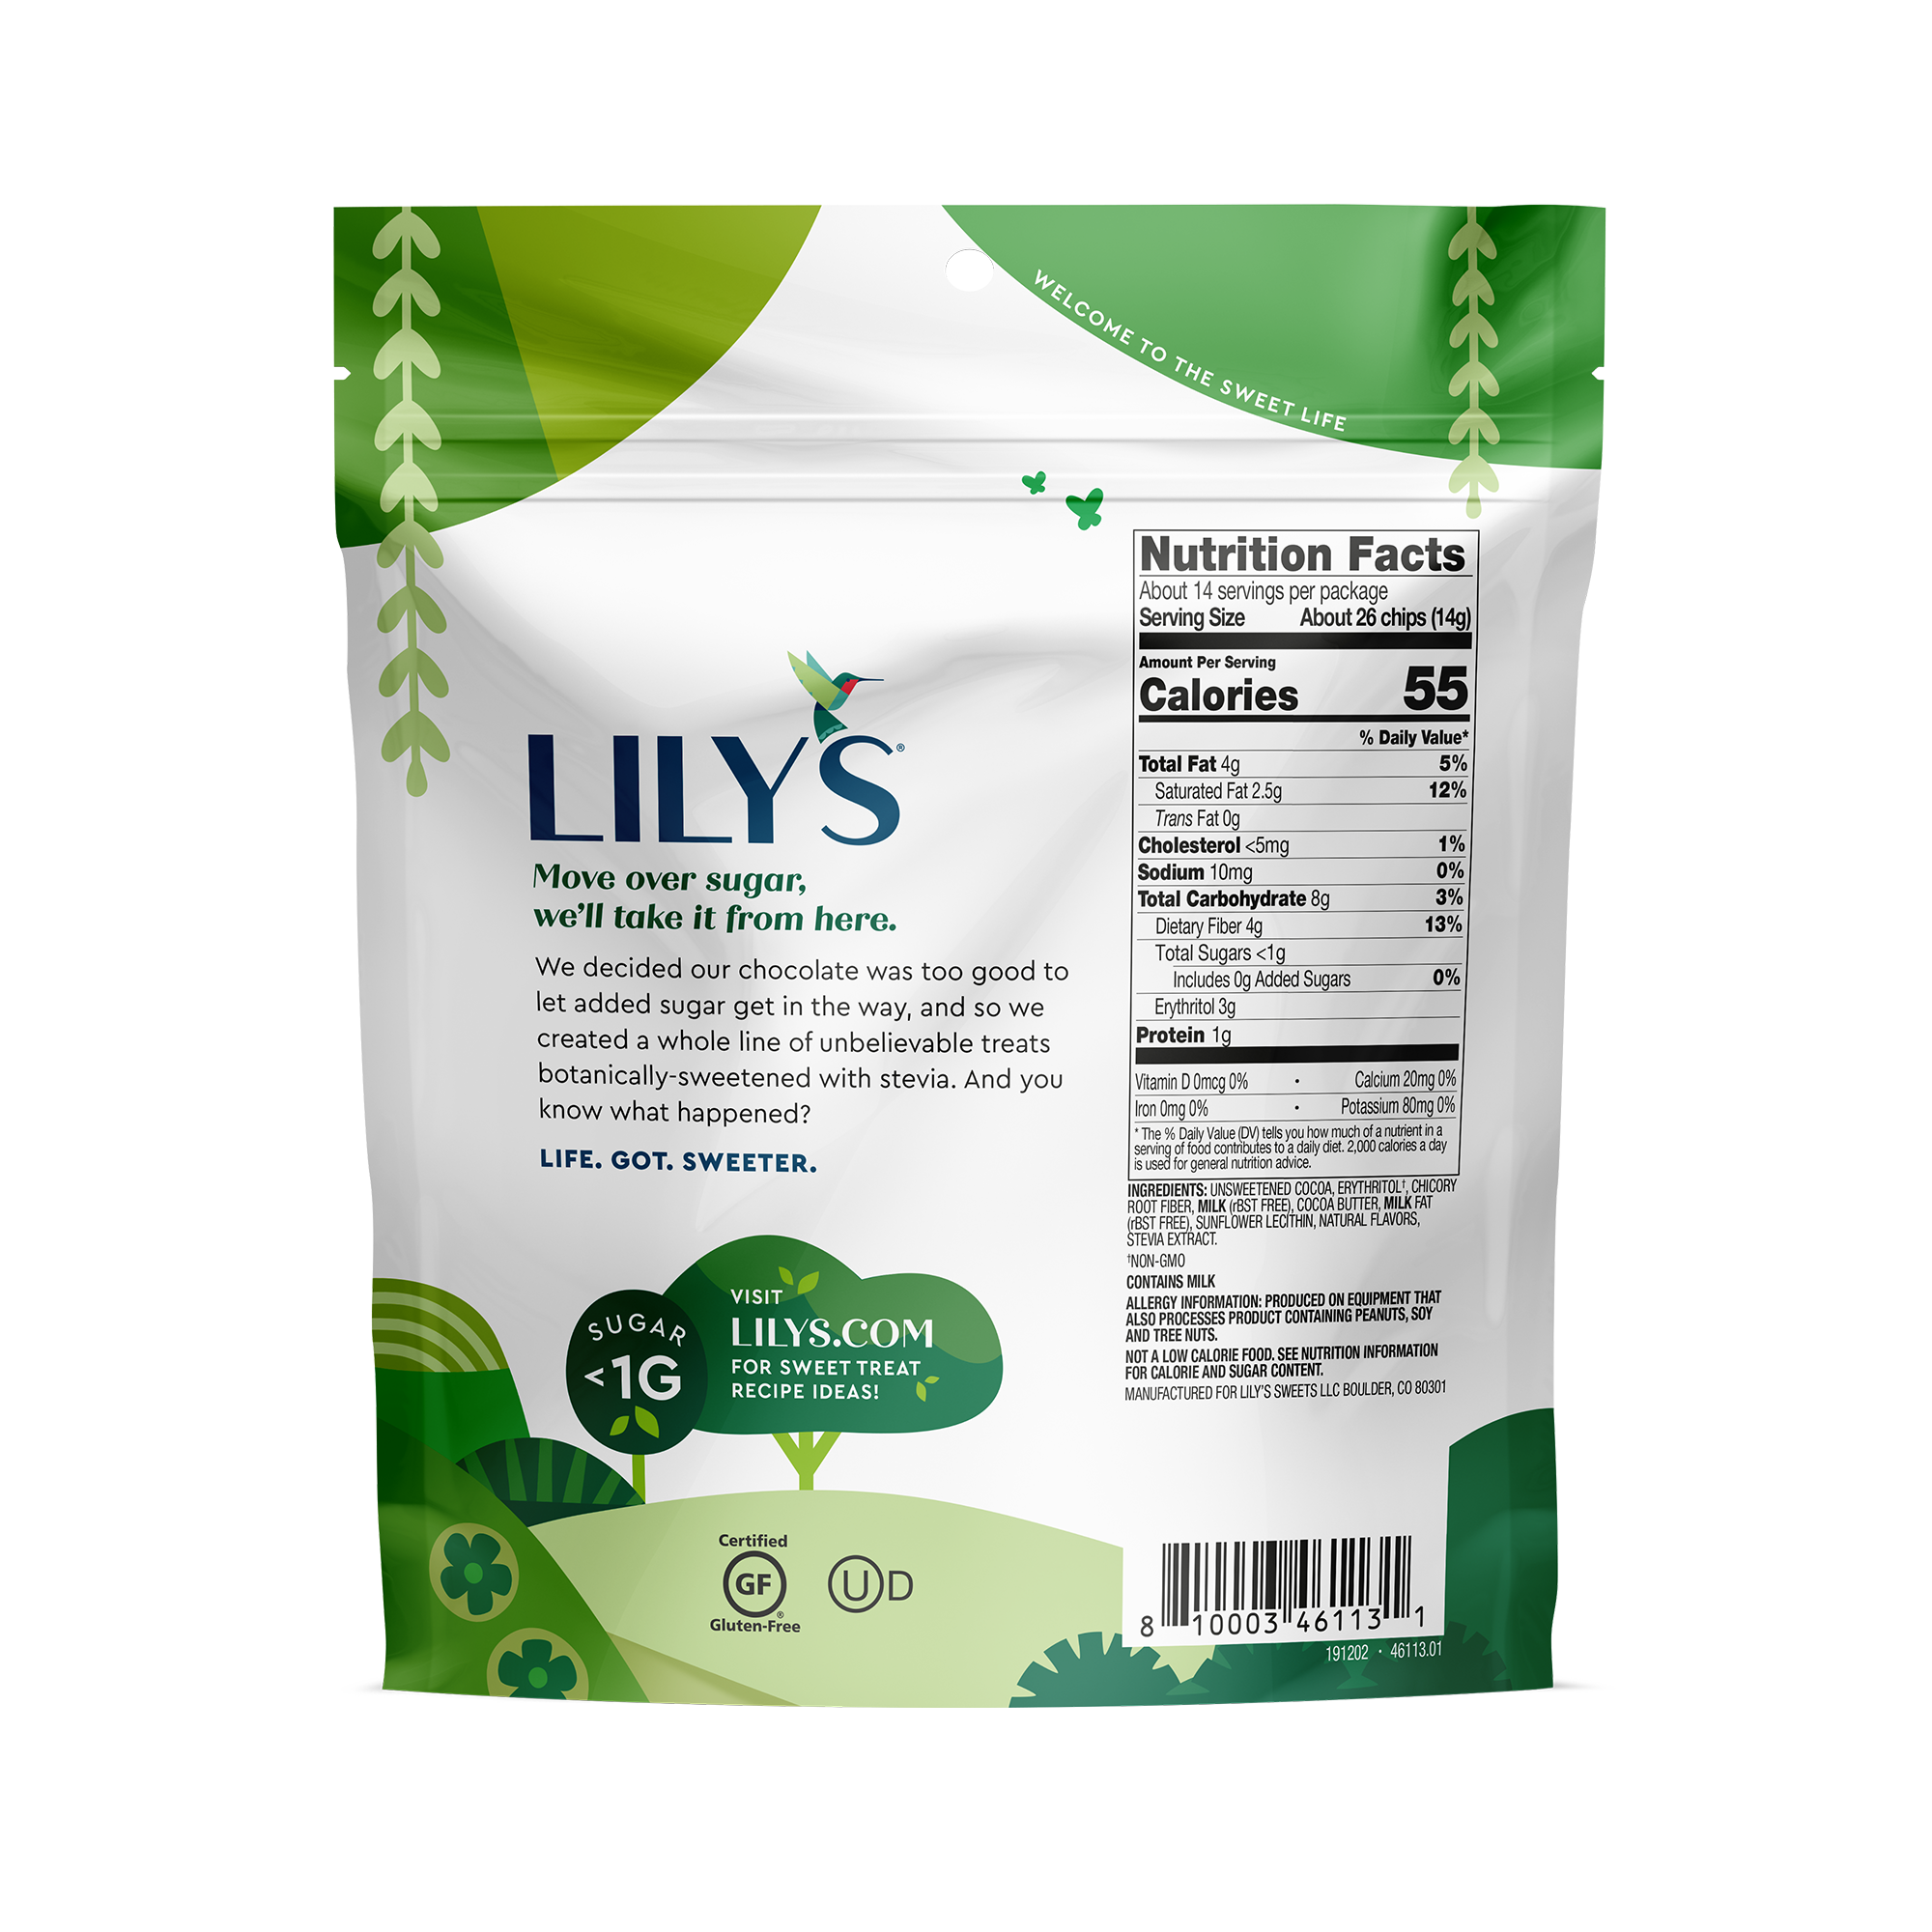 Lily's Chocolate Mint Flavor Baking Chips, 7oz